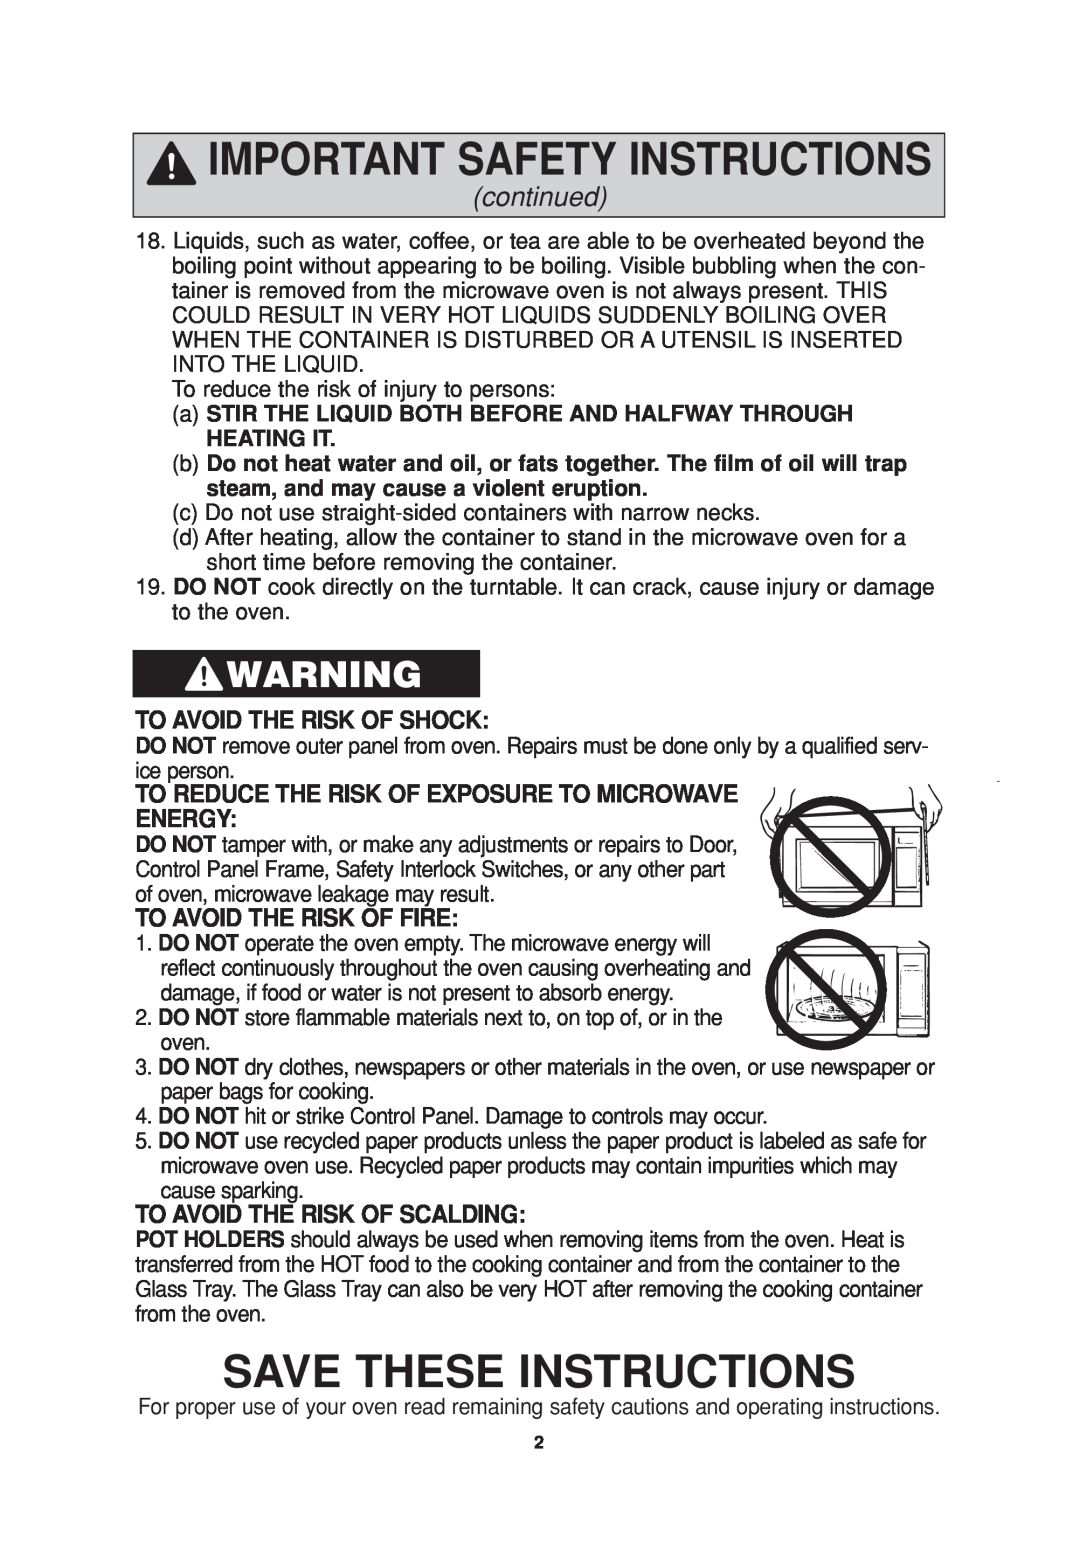 Panasonic NN-SN757 Save These Instructions, Important Safety Instructions, continued, To Avoid The Risk Of Shock, Energy 